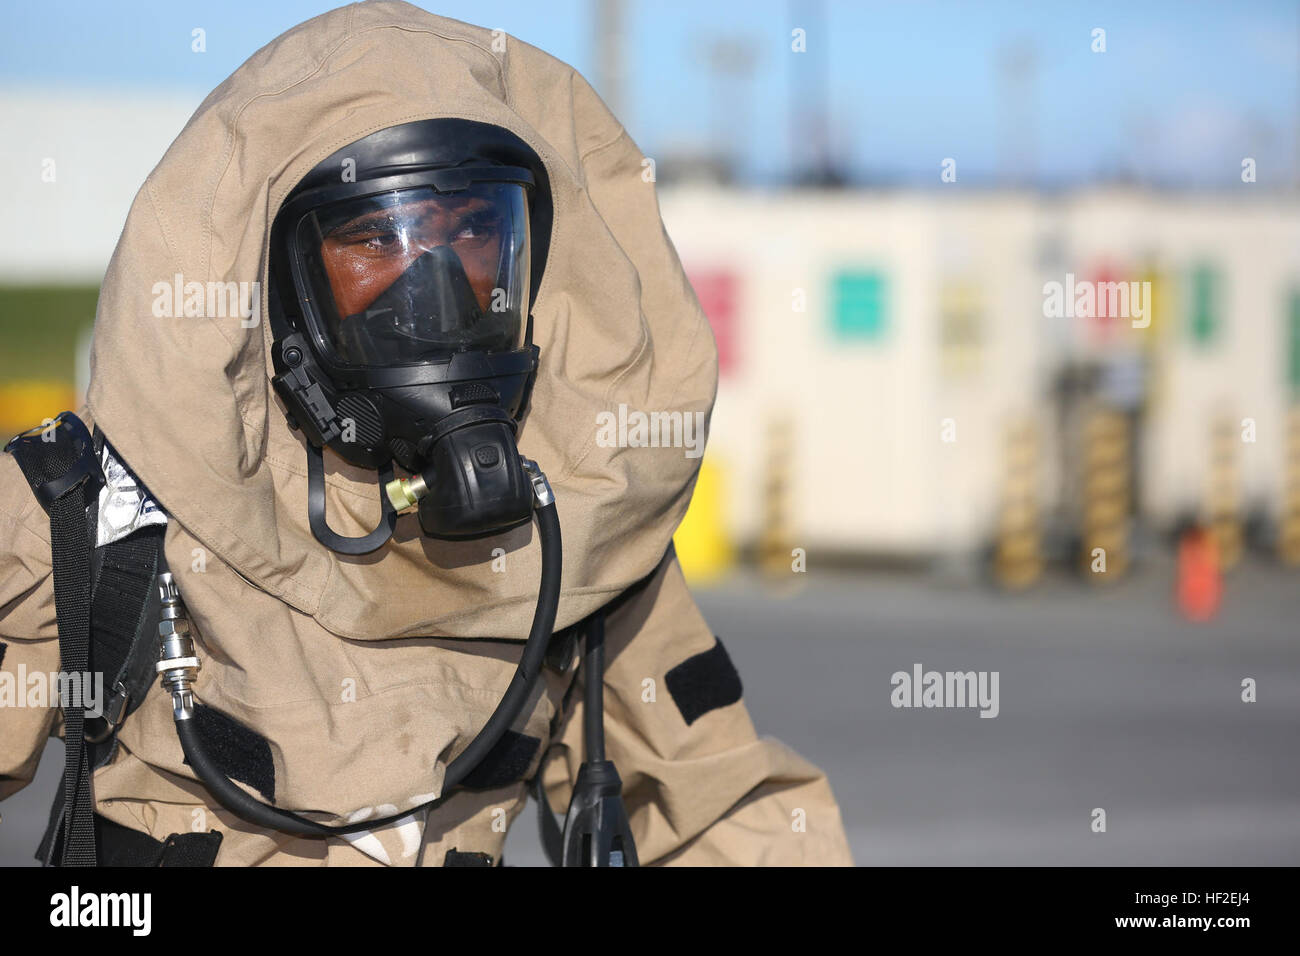 U.S. Marine Corps Lance Cpl. Wendal Albary, with Chemical, Biological, Radiological, and Nuclear Platoon, 1st Marine Aircraft Wing searches for a simulated contaminated site on Marine Corps Air Station Futenma, Okinawa, Japan, Aug. 27, 2014. The training was conducted as part of Ulchi Freedom Guardian 14, a combined military exercise between South Korea and the United States, to help Marines practice casualty evacuation and decontamination of individuals in chemically contaminated environments. (U.S. Marine Corps photo by MCIPAC Combat Camera Lance Cpl. Sergio RamirezRomero/ Released) 1st Mari Stock Photo